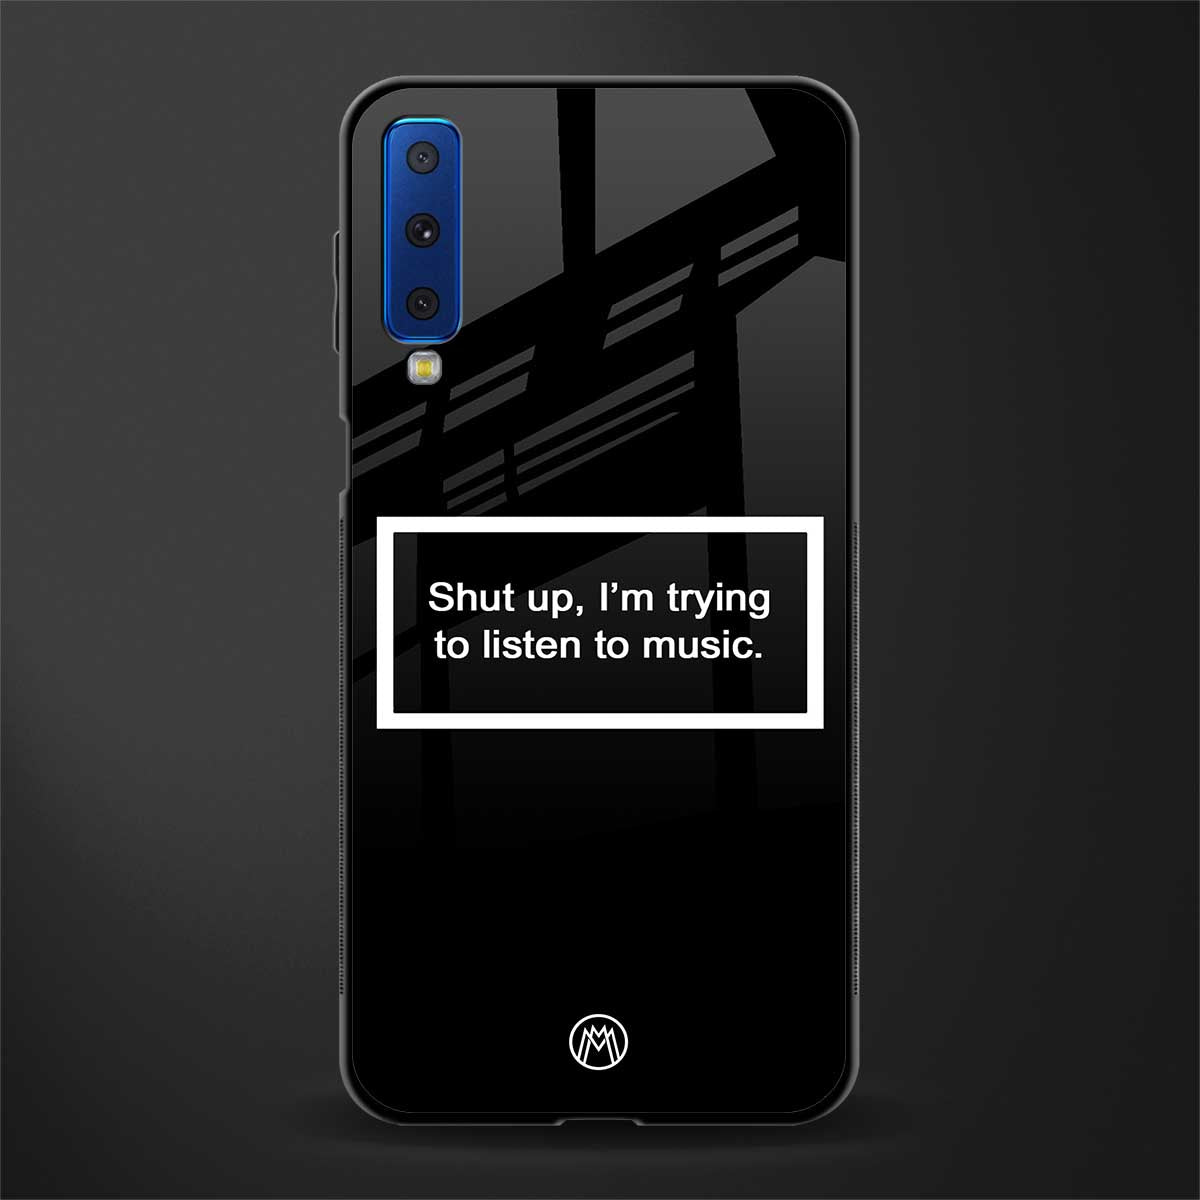 shut up and listen to music black glass case for samsung galaxy a7 2018 image